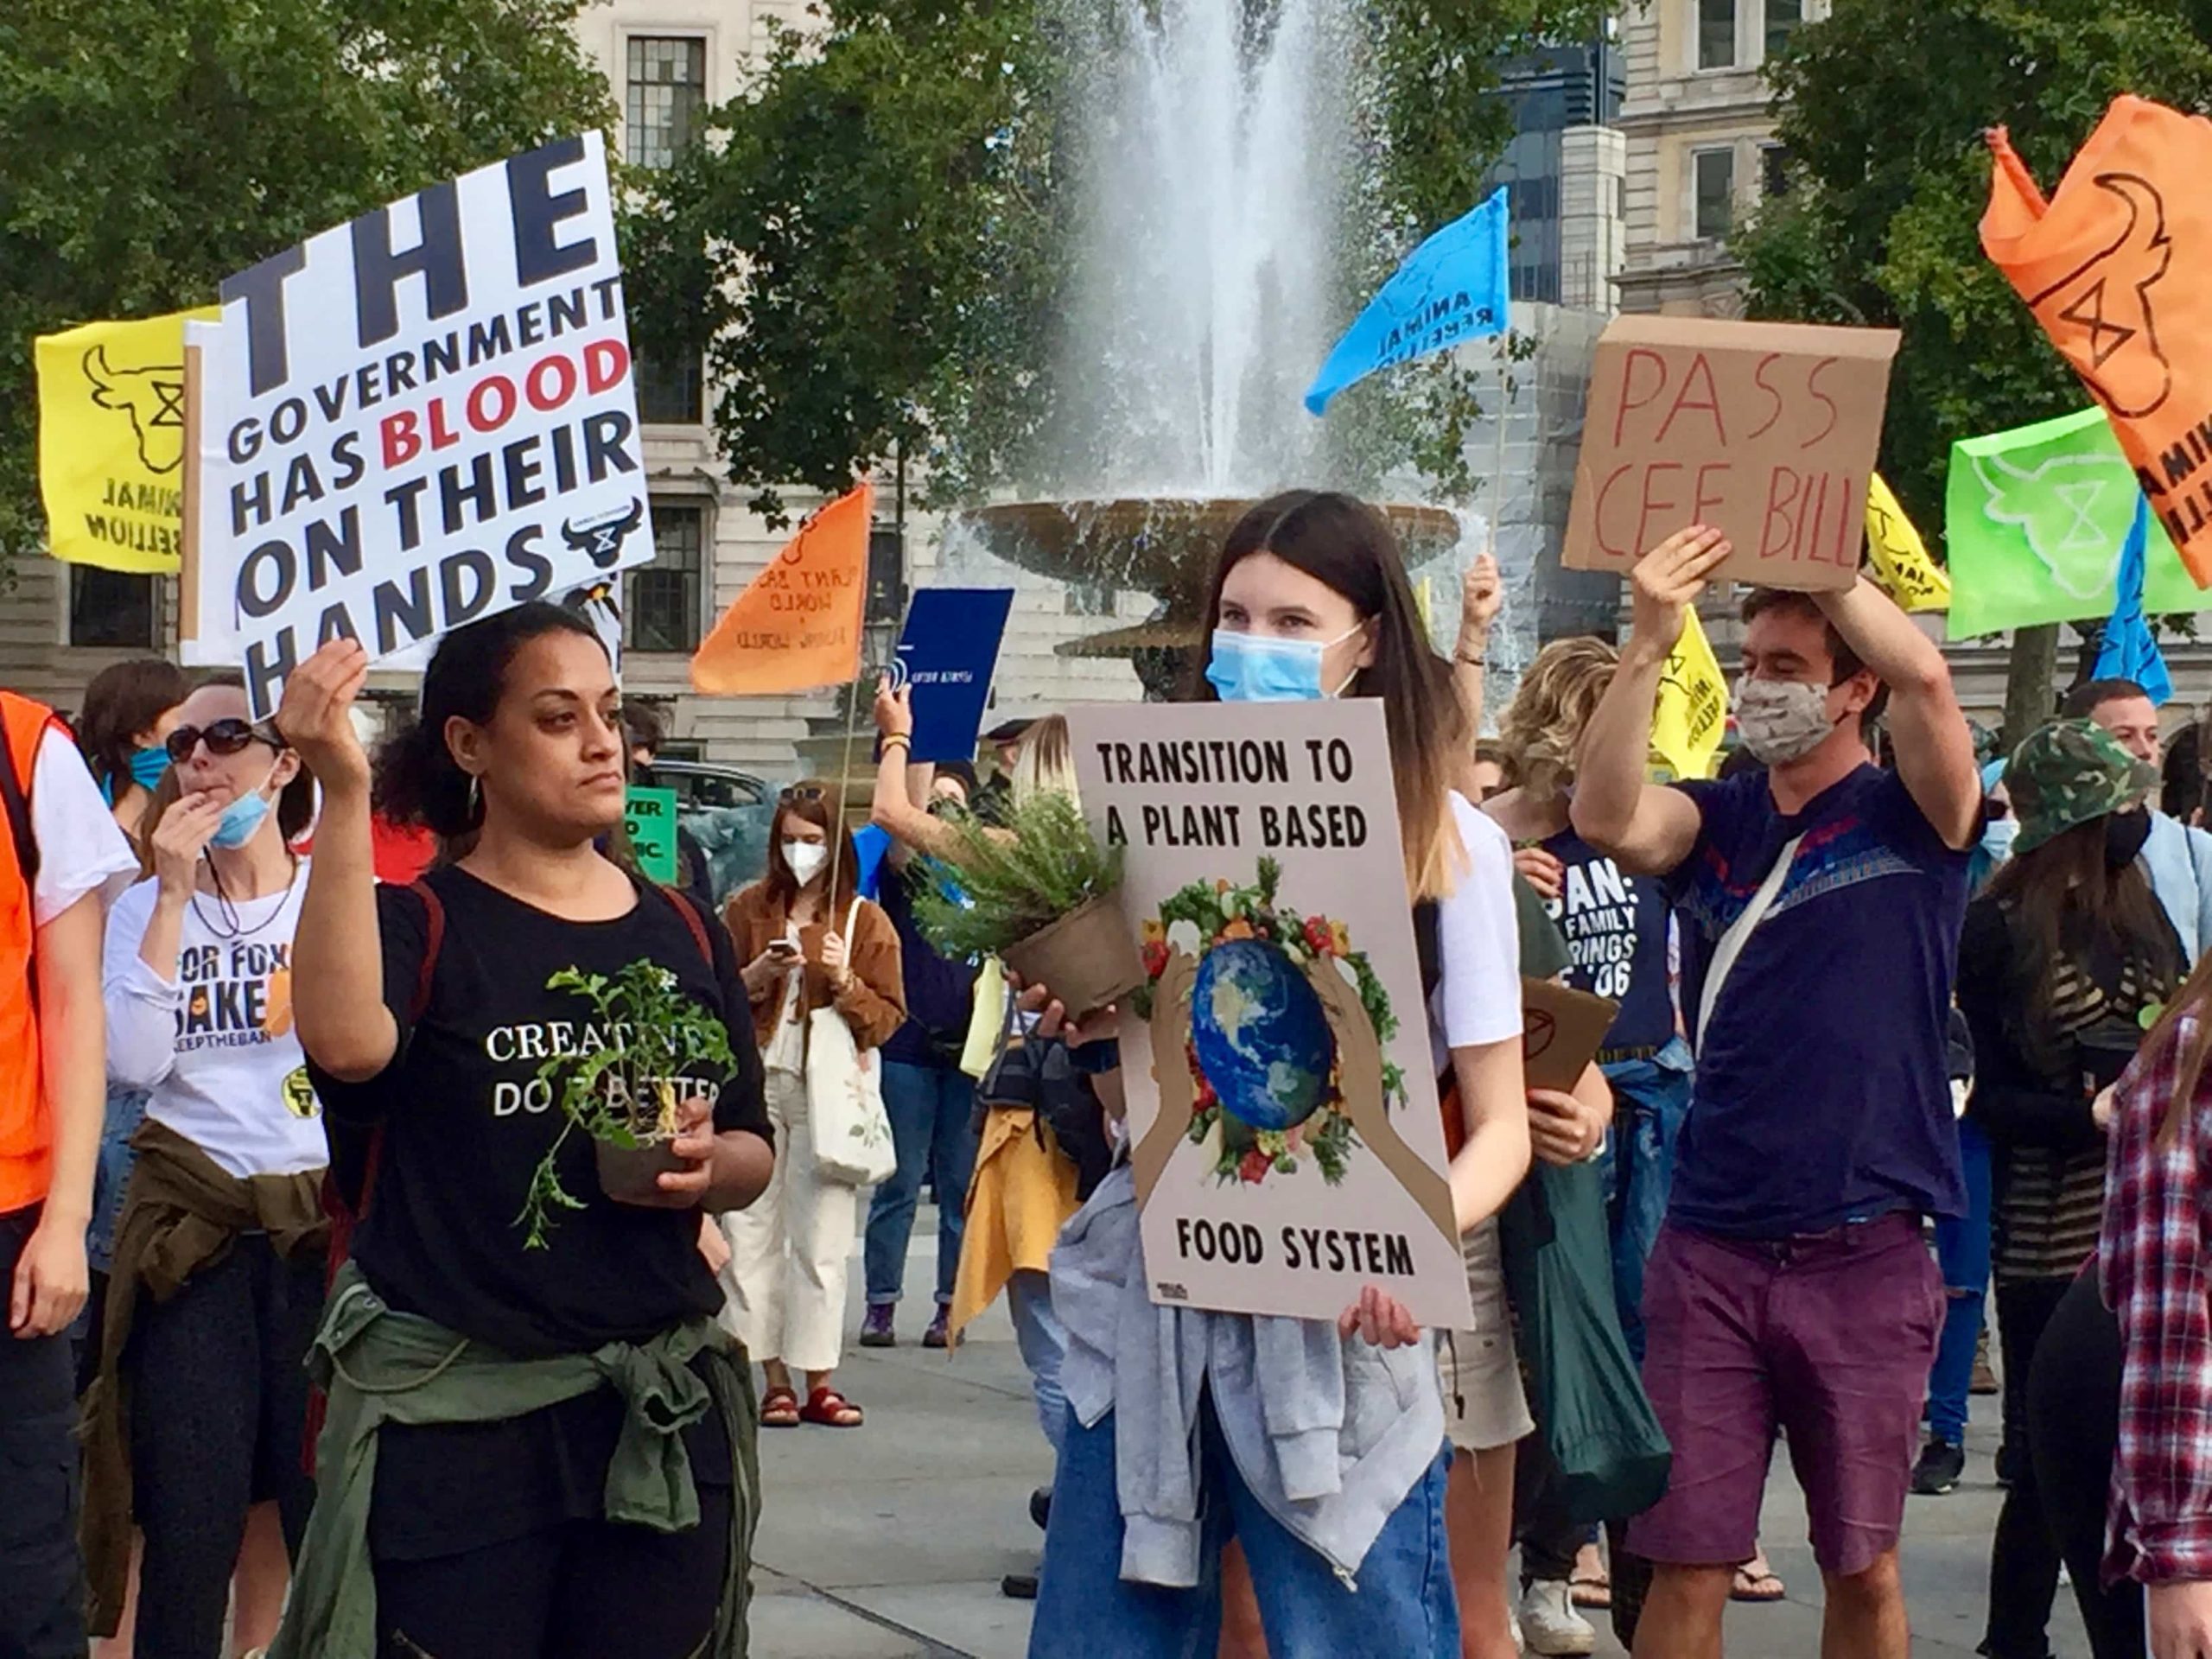 Vegan protesters holding placards to demand a plant-based food system